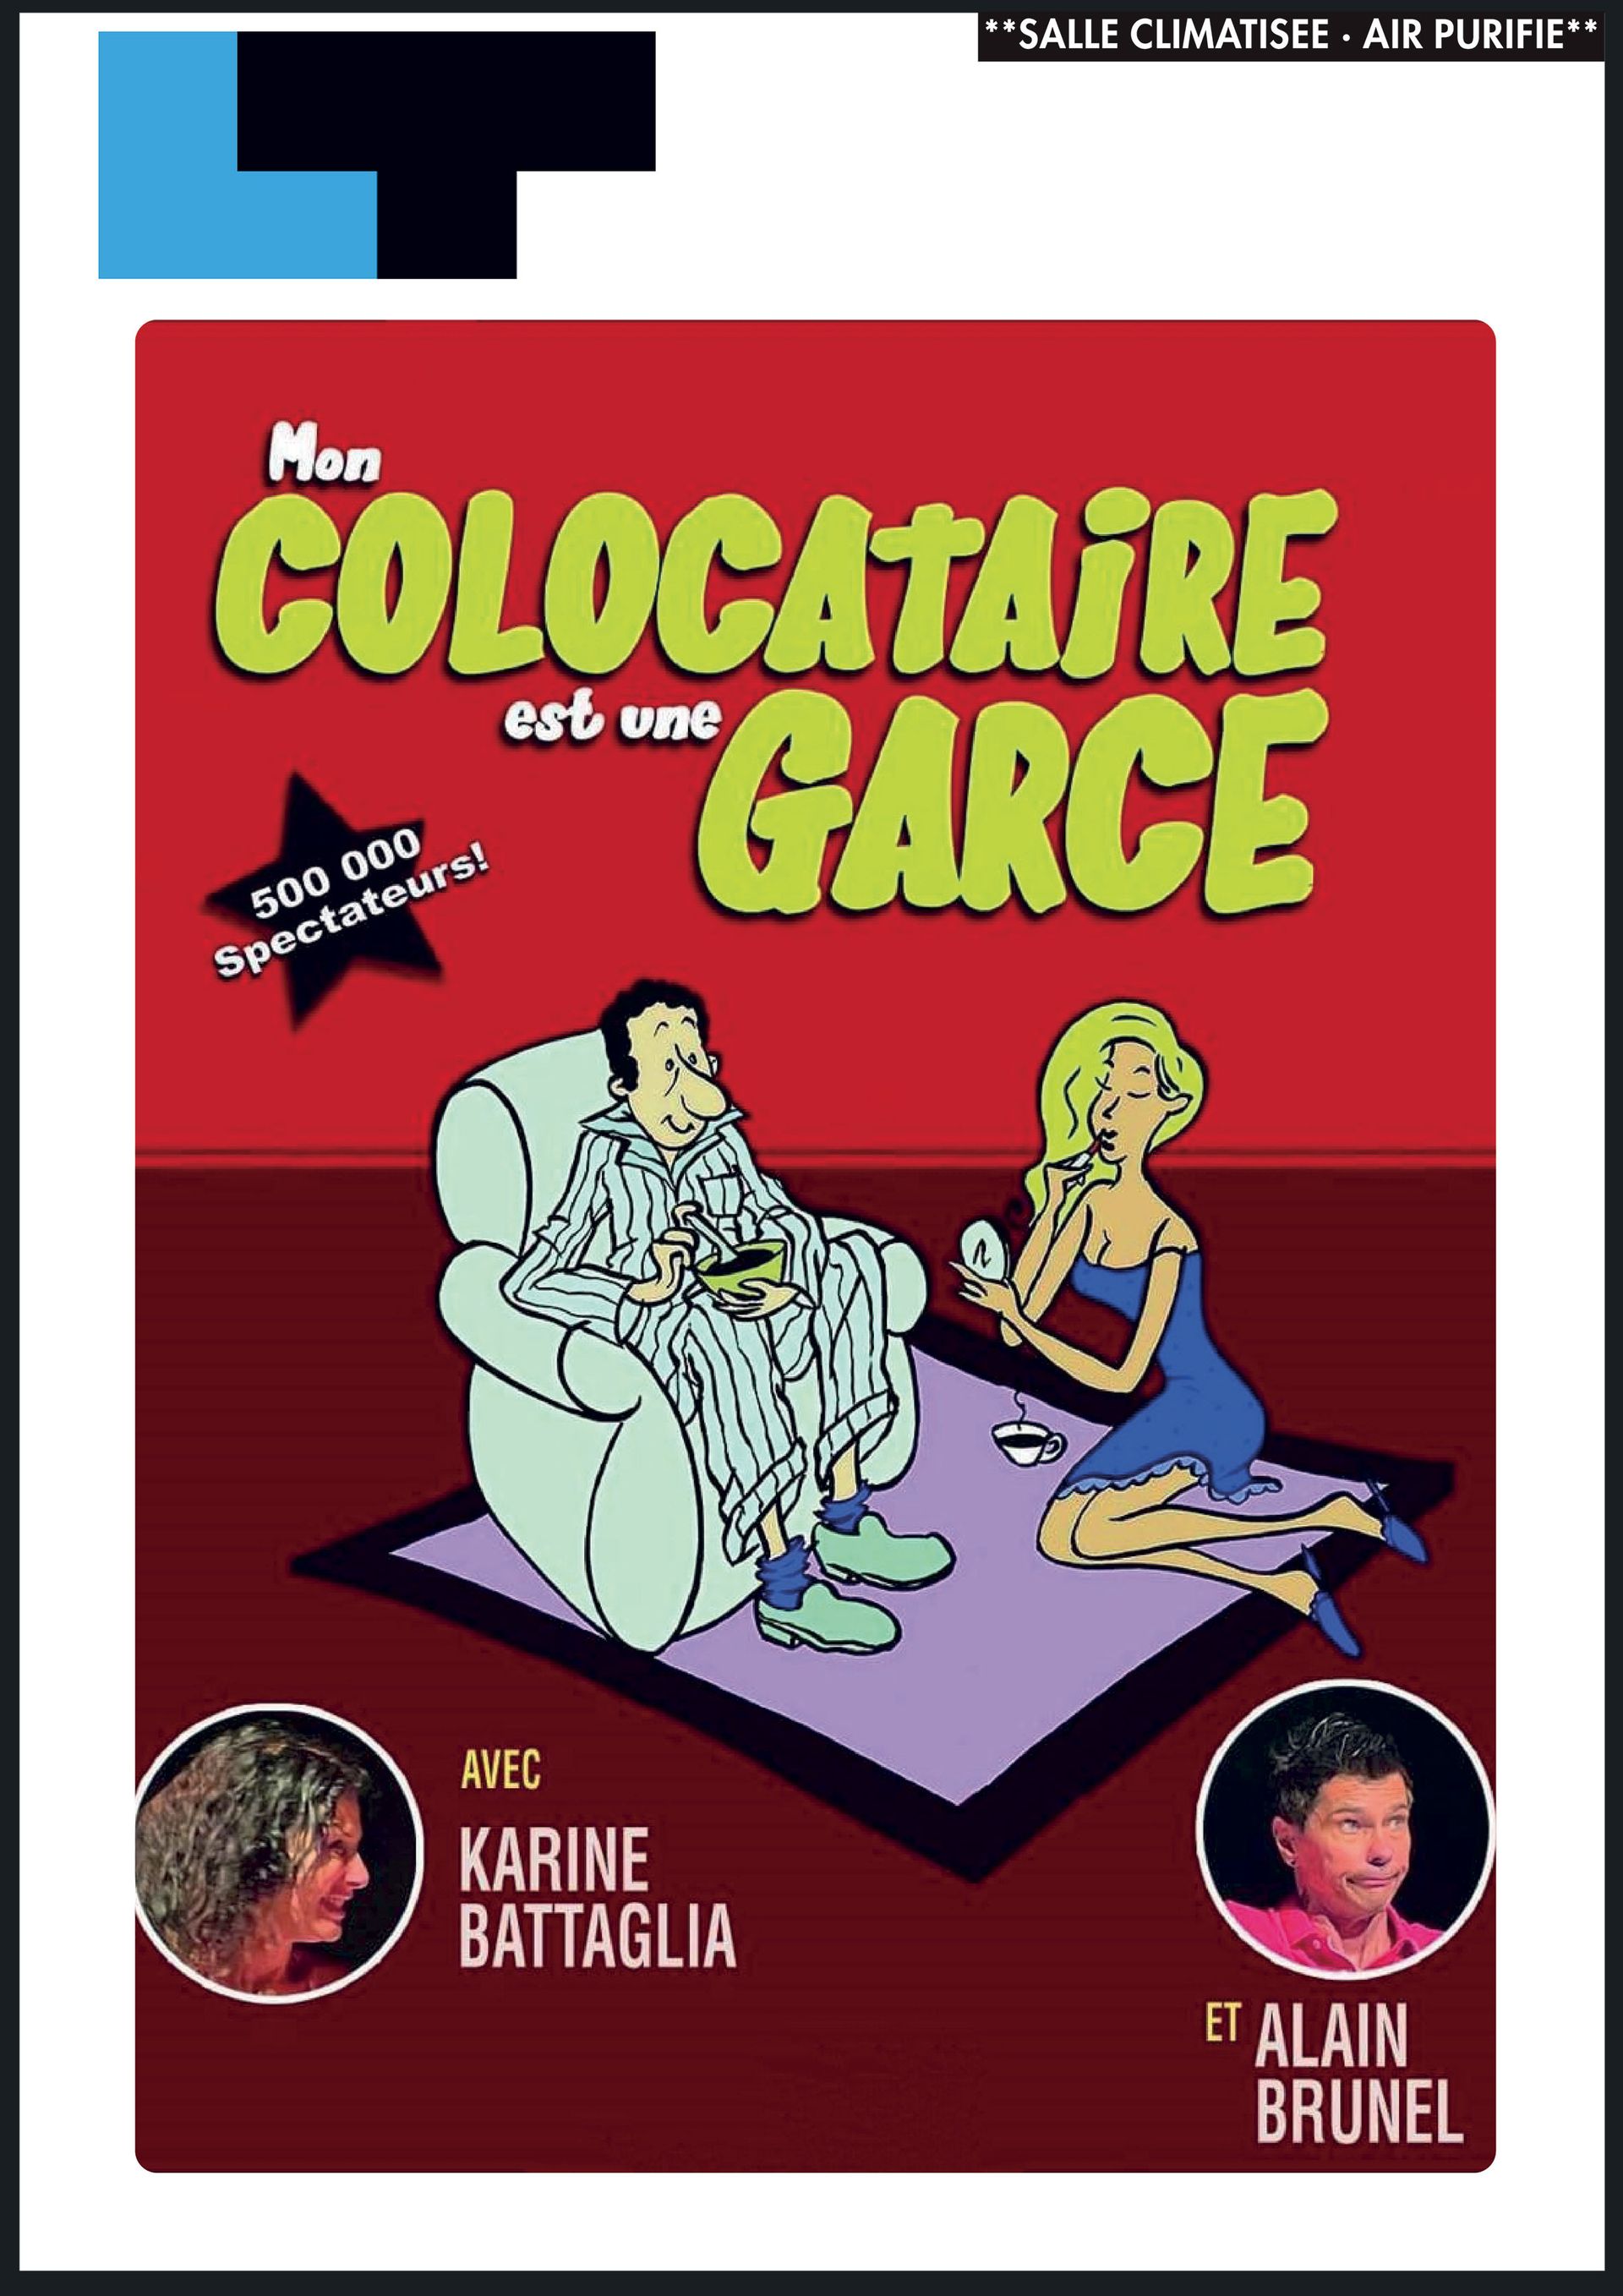 A poster for a movie called colocataire garce